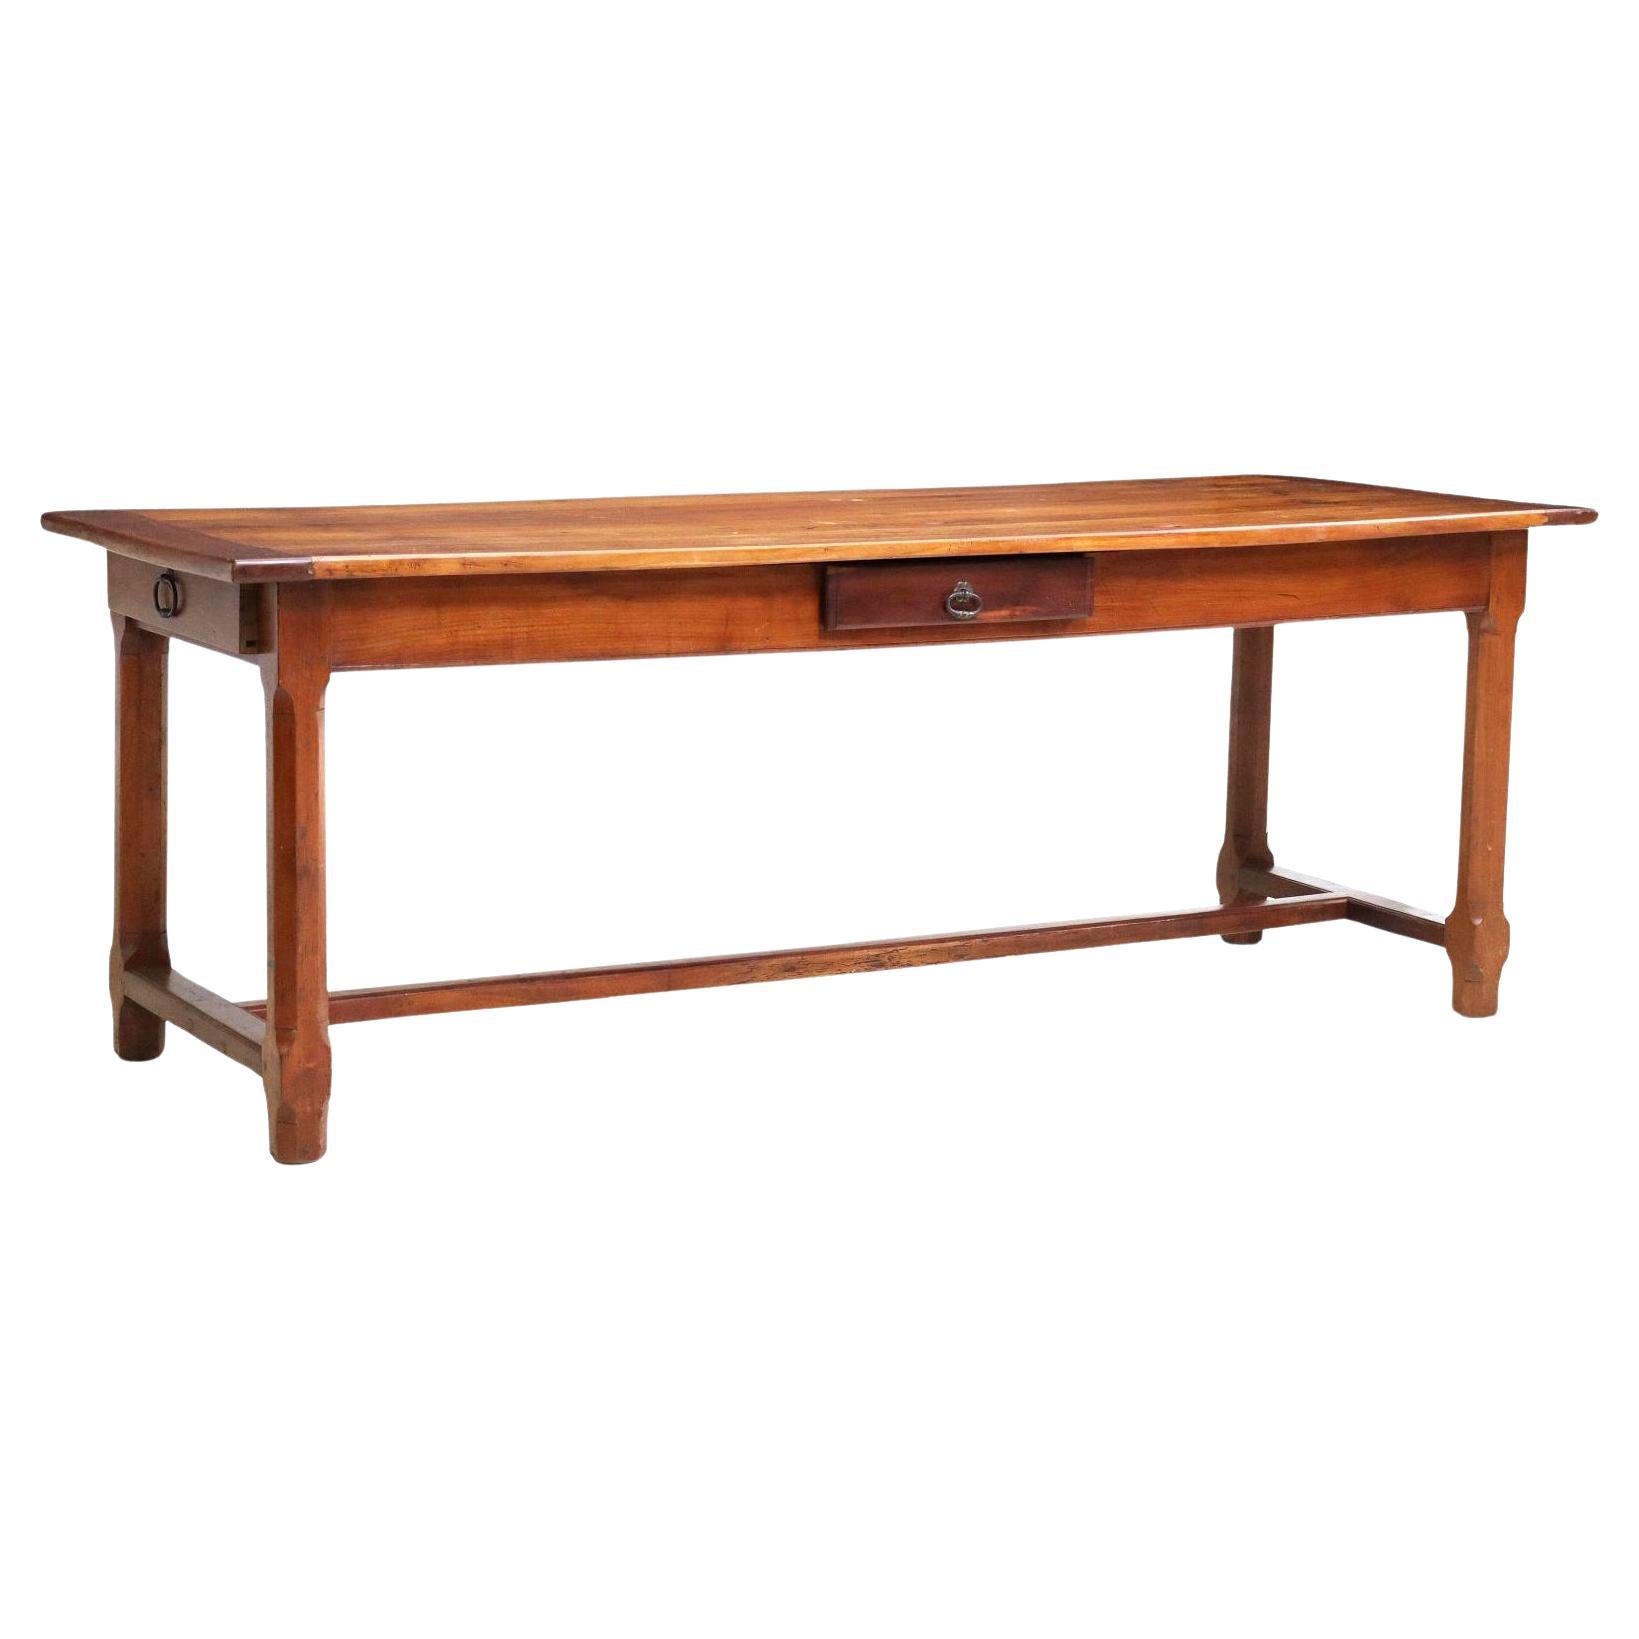 French Provincial Fruitwood Farmhouse Table